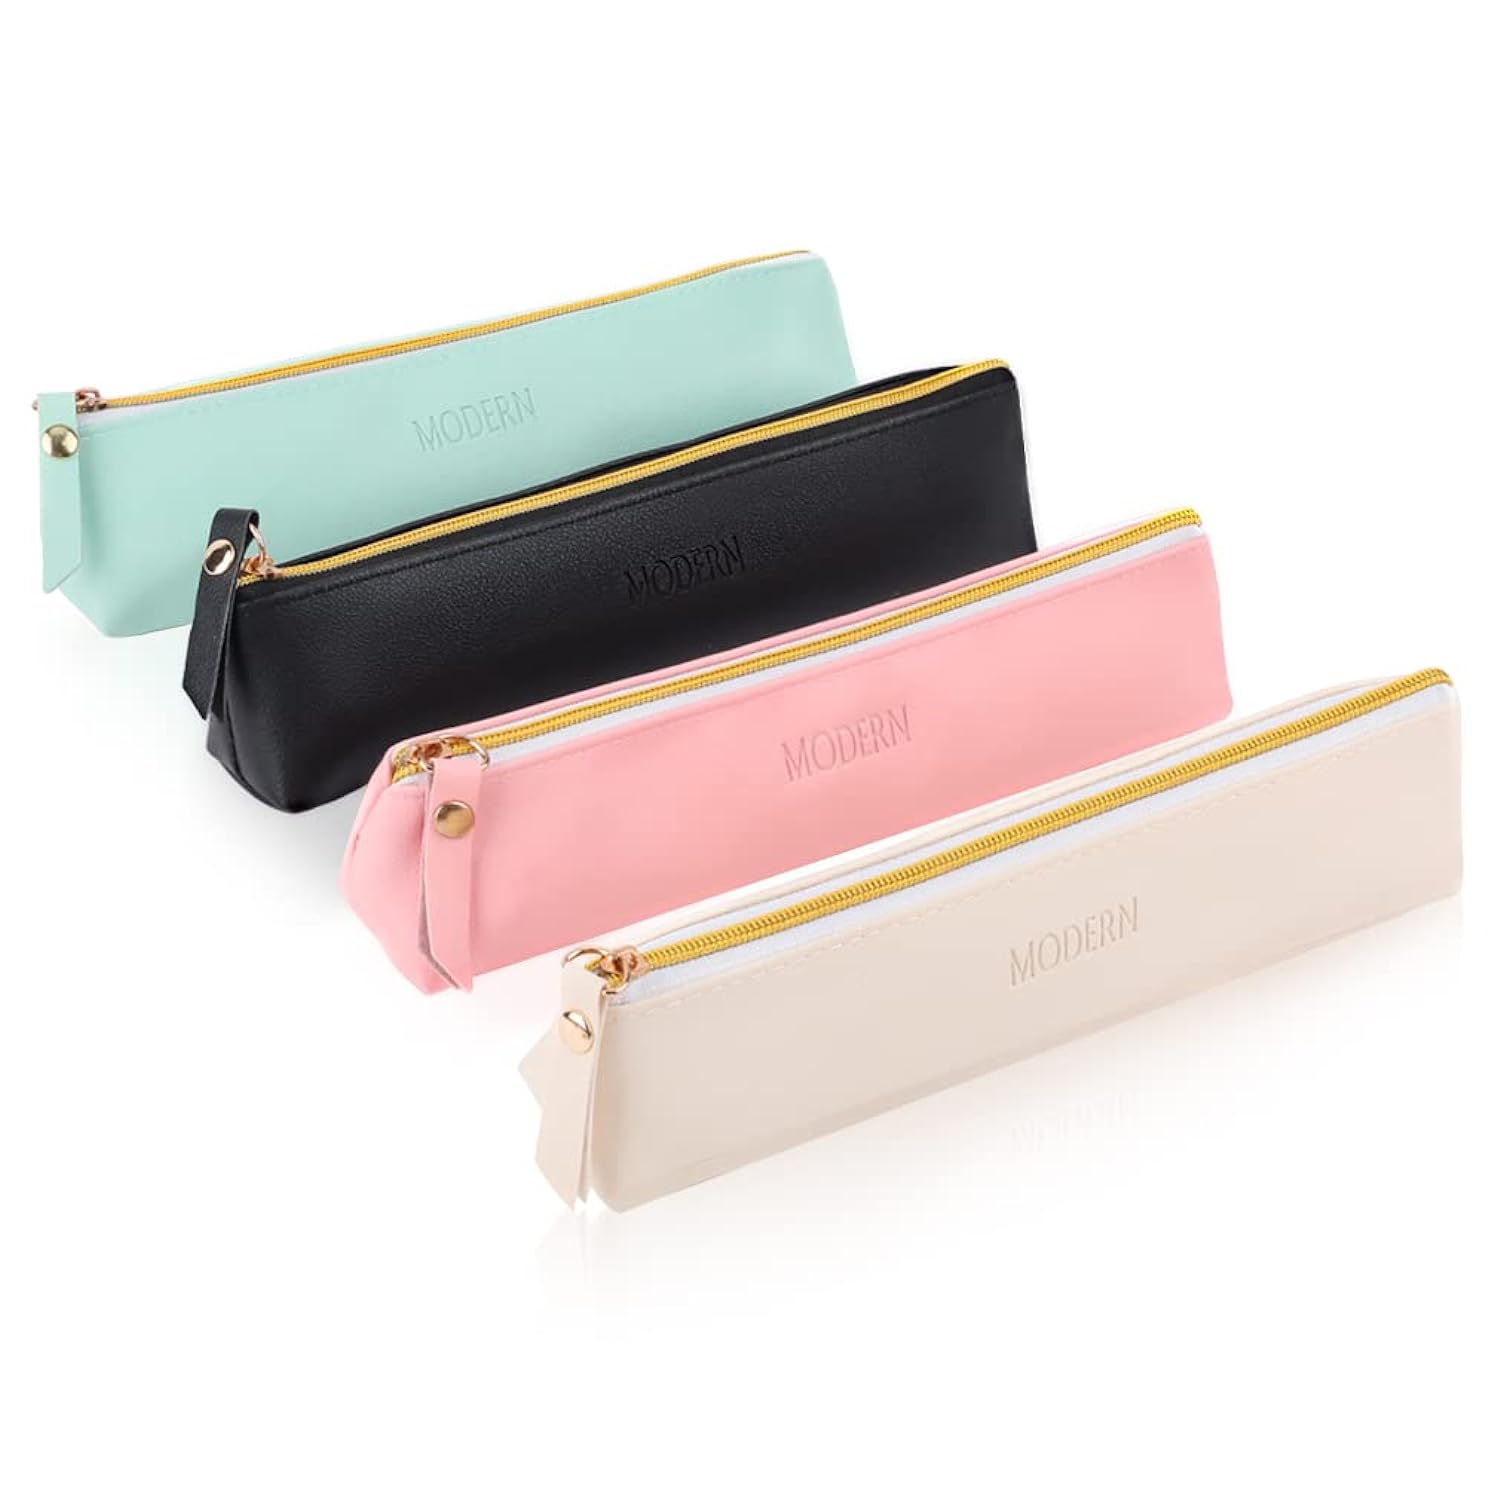 Great Choice Products 4 Pcs Small Pencil Case Pu Leather Pencil Pouch Waterproof Organizer Storage Bag Cosmetic Zipper Pouch For Women Men (4Pcs)